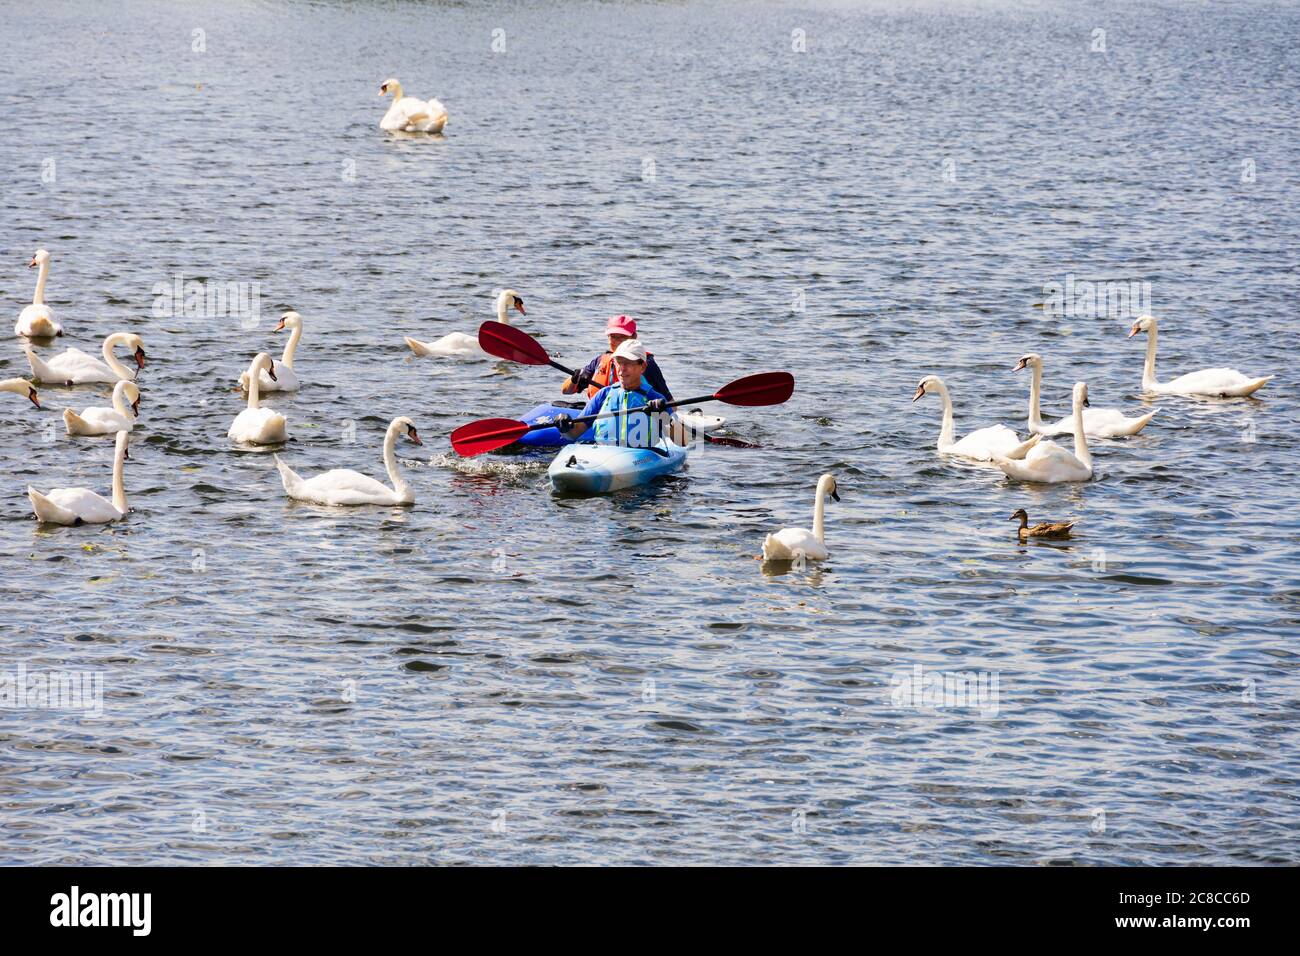 Kayakers paddle through a bevy of swans on the River Great Ouse at St Ives, Cambridgeshire, England Stock Photo